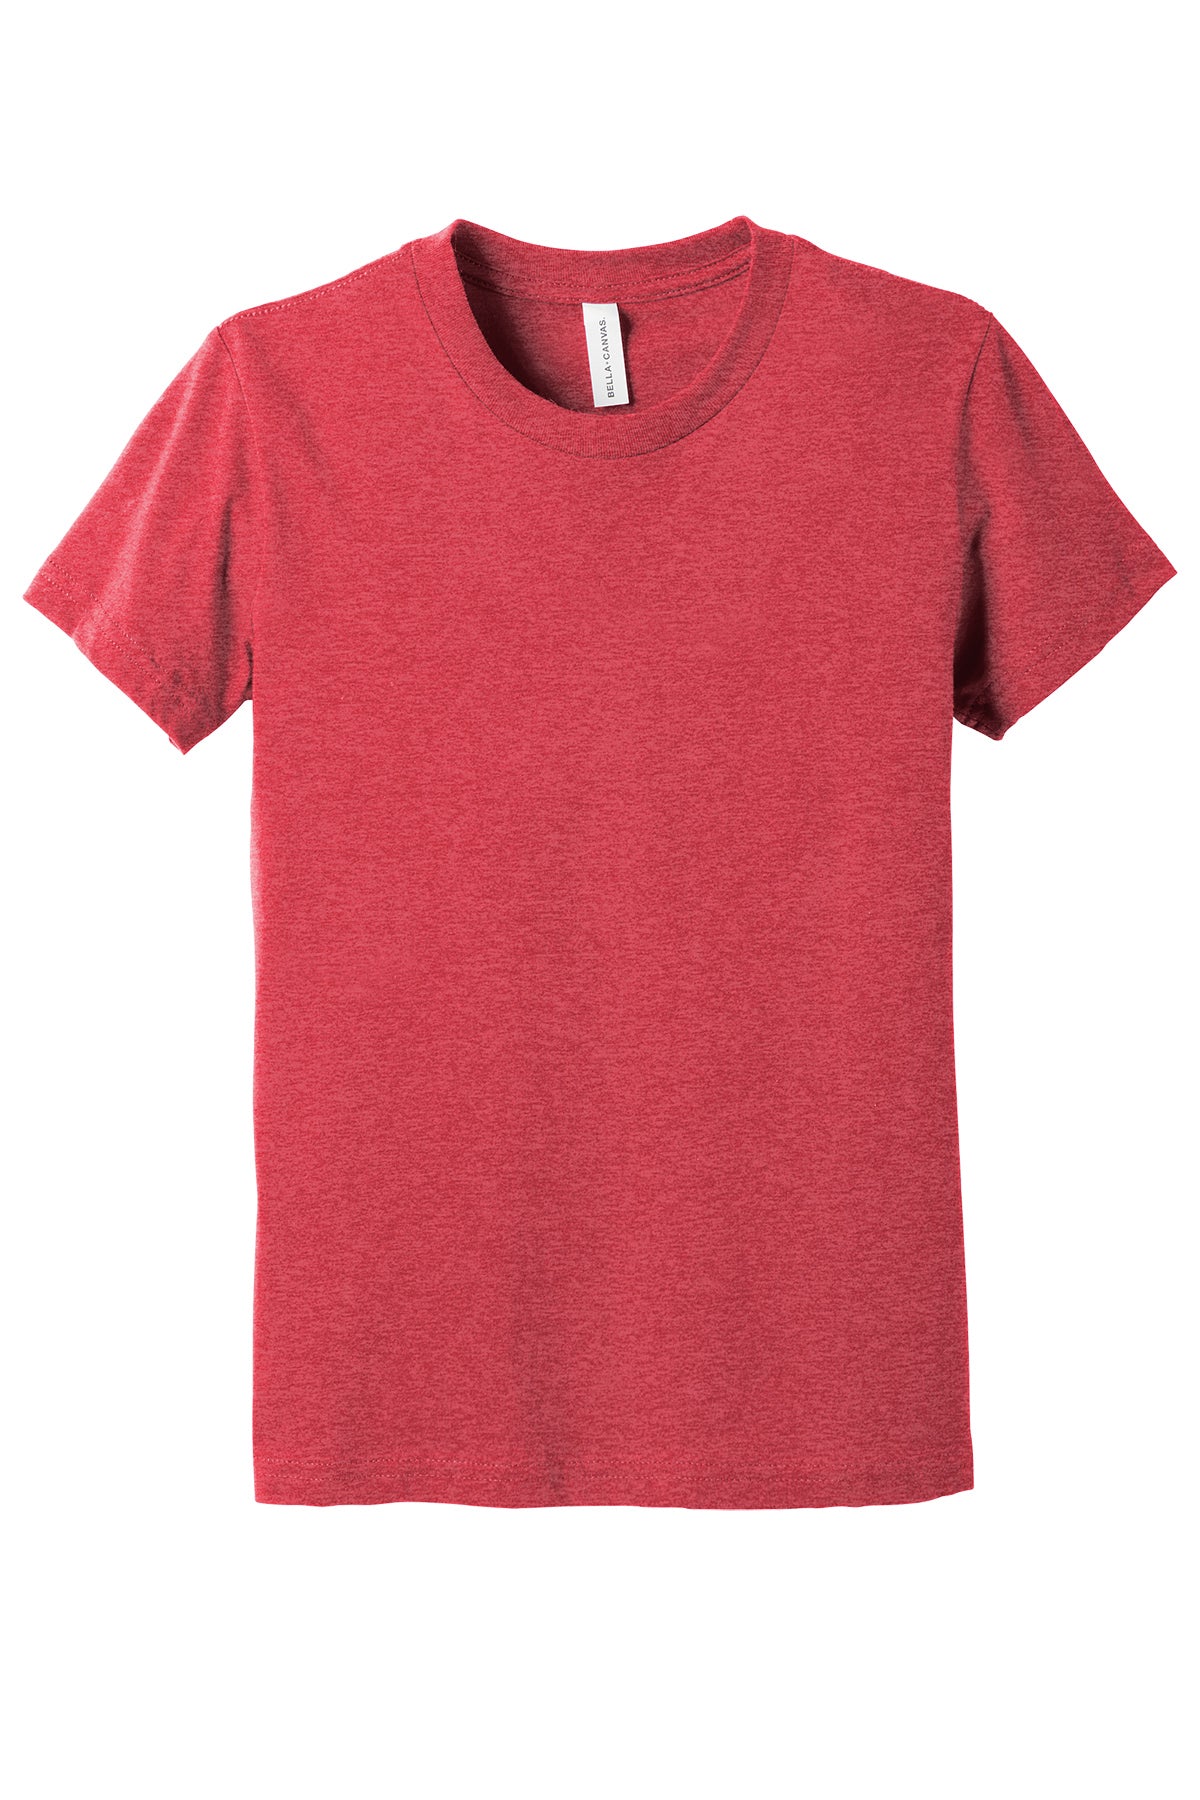 Bella+Canvas Bc3001Ycvc Youth T-Shirt Yth Small / Heather Red